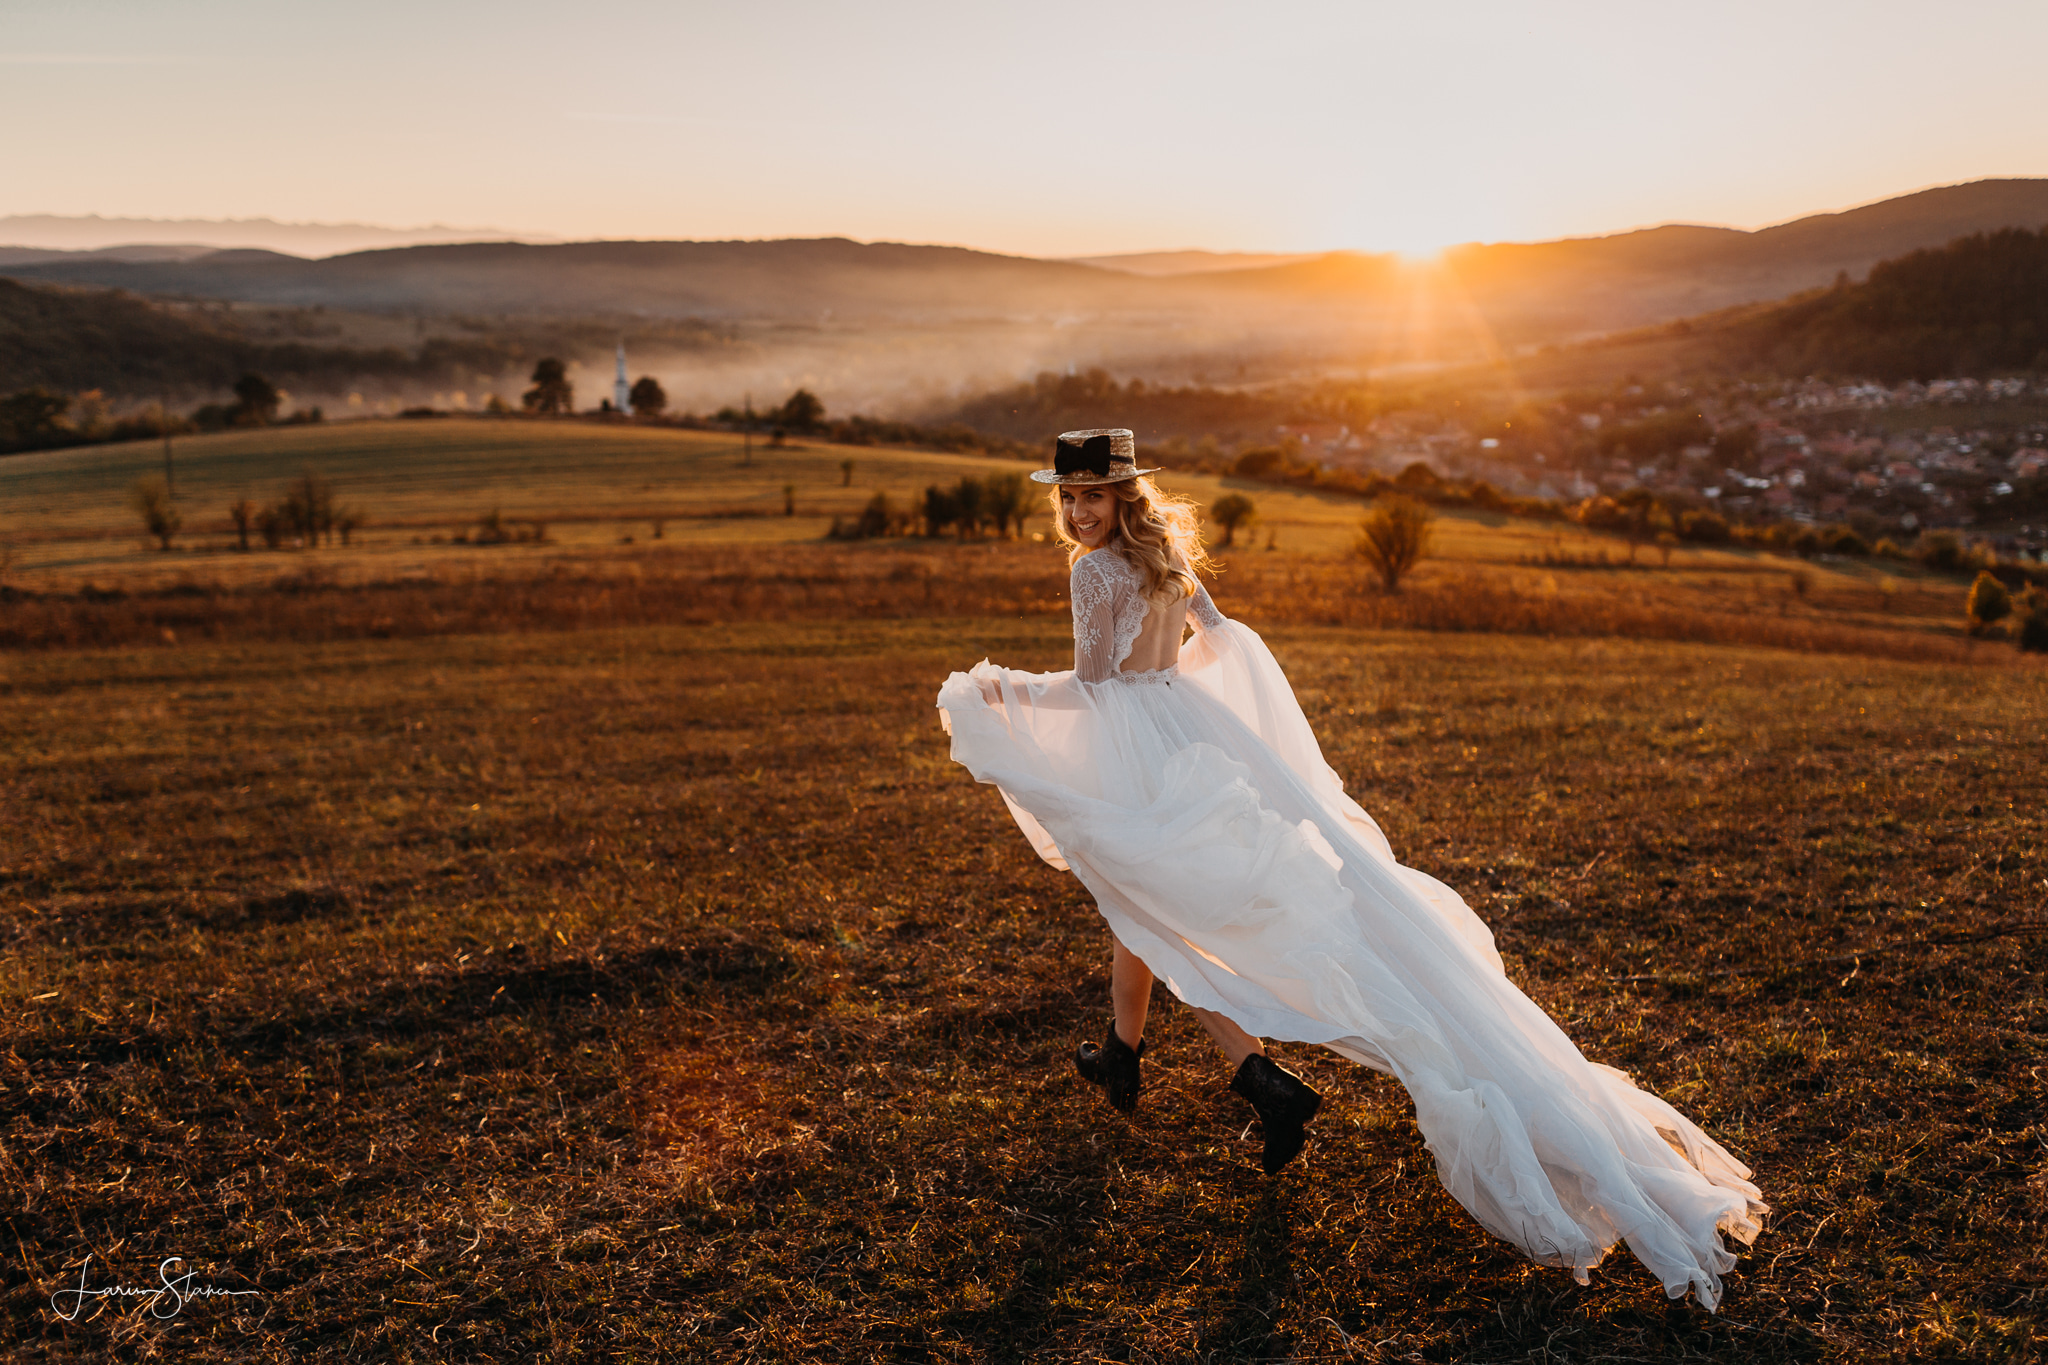 bride running on the fields in the sweet light of the golden hour, dressed in a silk wedding dress